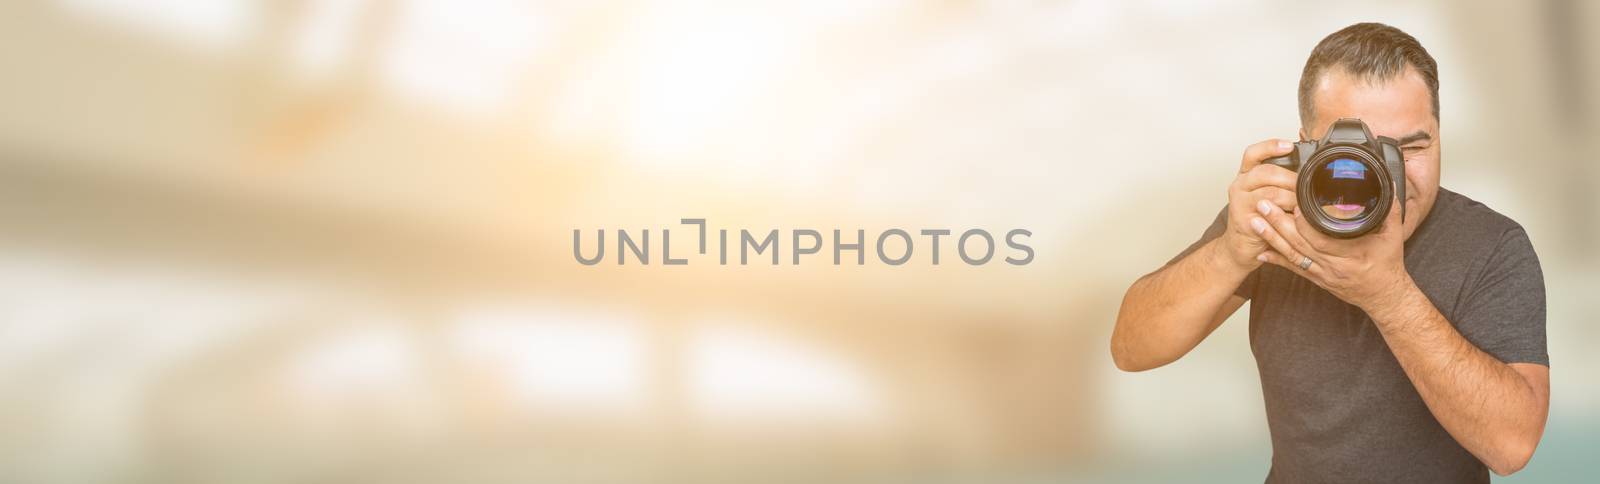 Hispanic Man with DSLR Camera Wide Banner with Room For Copy.